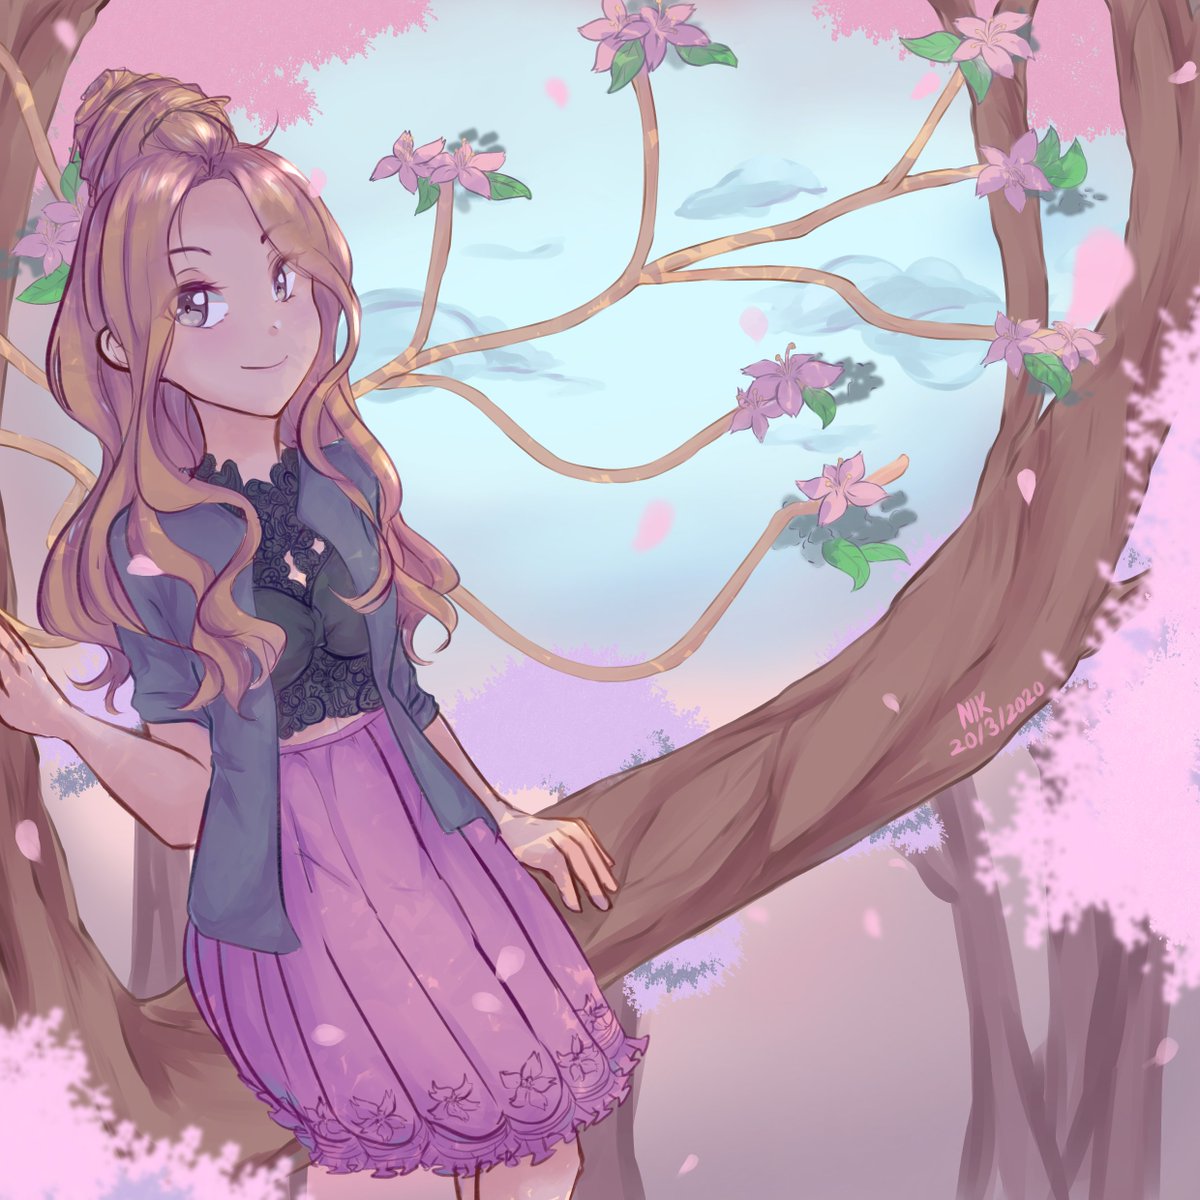 Nik On Twitter I Saw Her Outfit On Roblox And It Looked Cute So I Drew Beeismrblx Chilling On The Branches Of A Cherry Blossom Tree Https T Co I4vx727xm7 - cherry blossom roblox